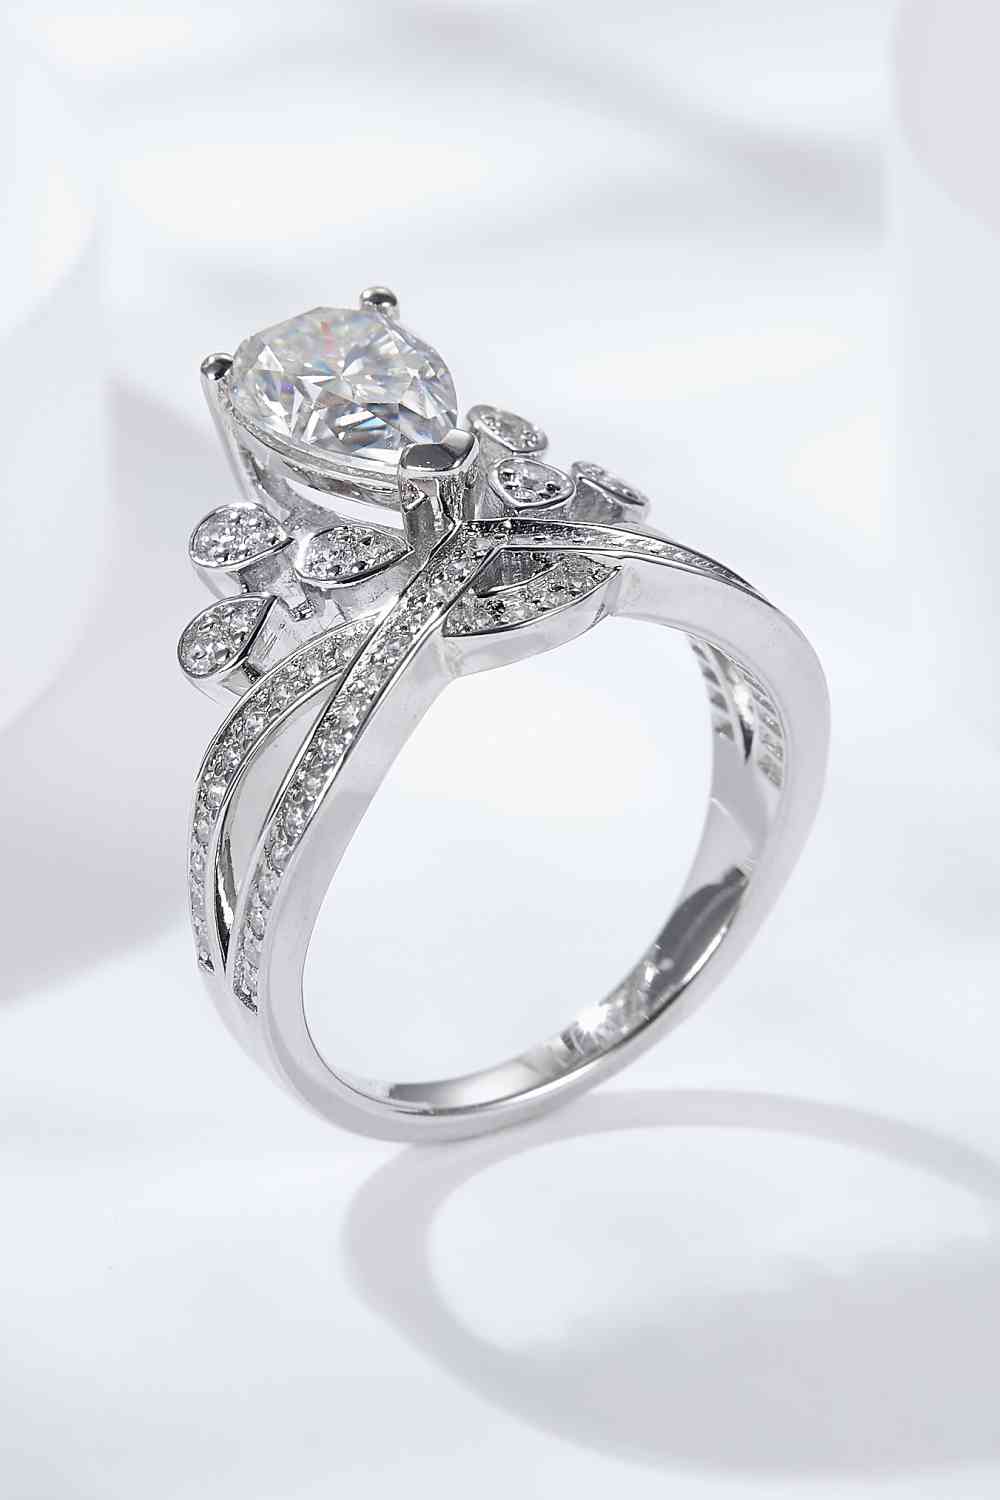 a white gold ring with a pear shaped diamond